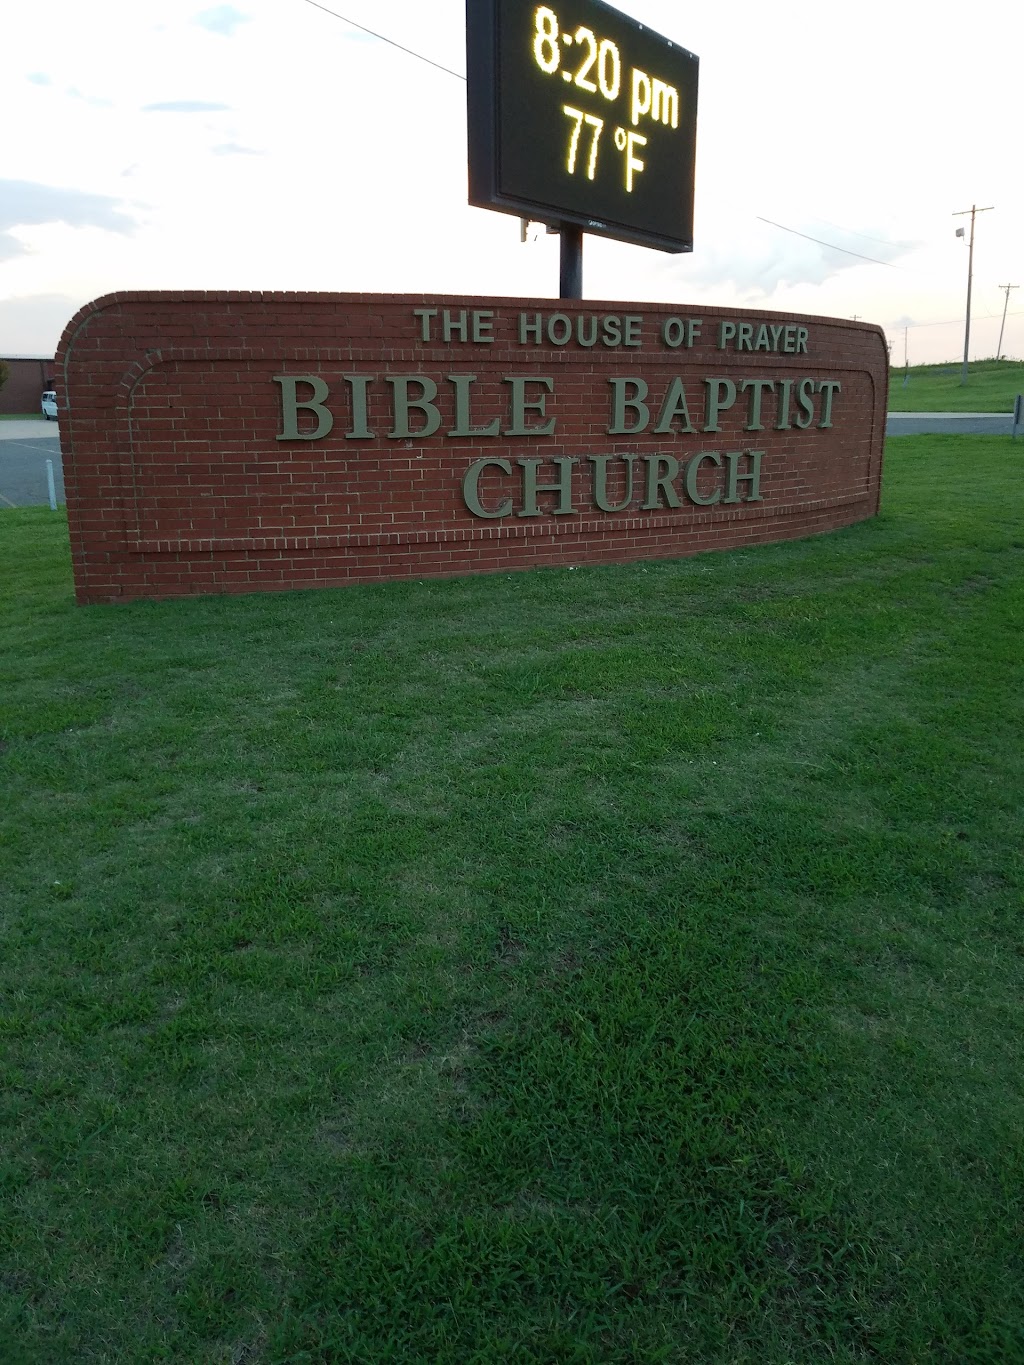 SouthPointe Baptist | 4820 S Division St, Guthrie, OK 73044, USA | Phone: (405) 282-8332